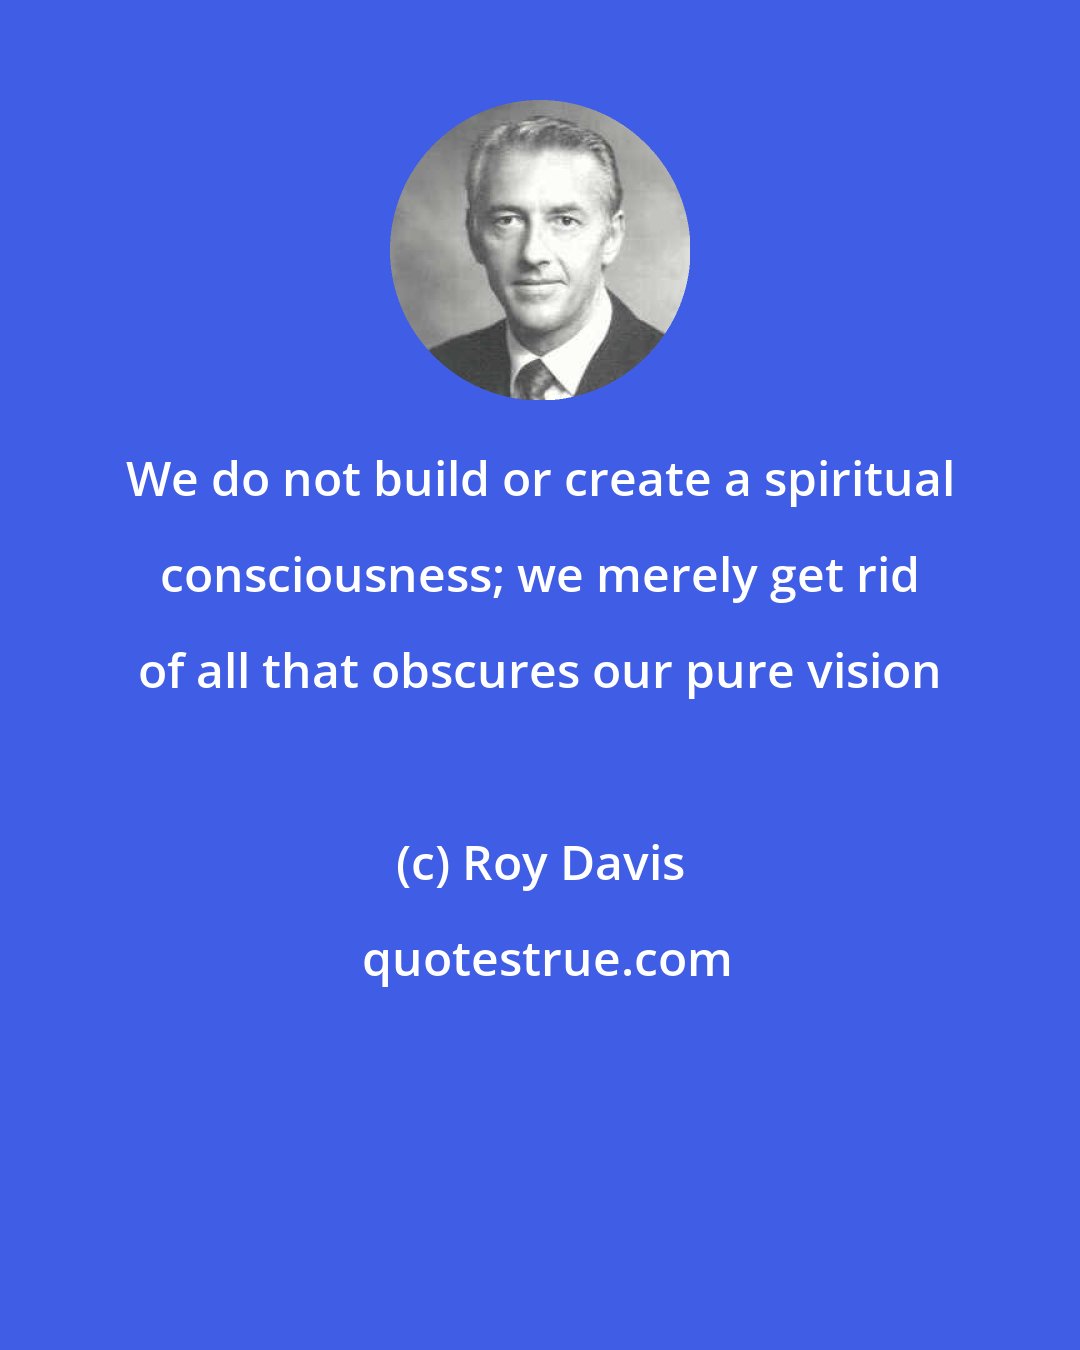 Roy Davis: We do not build or create a spiritual consciousness; we merely get rid of all that obscures our pure vision